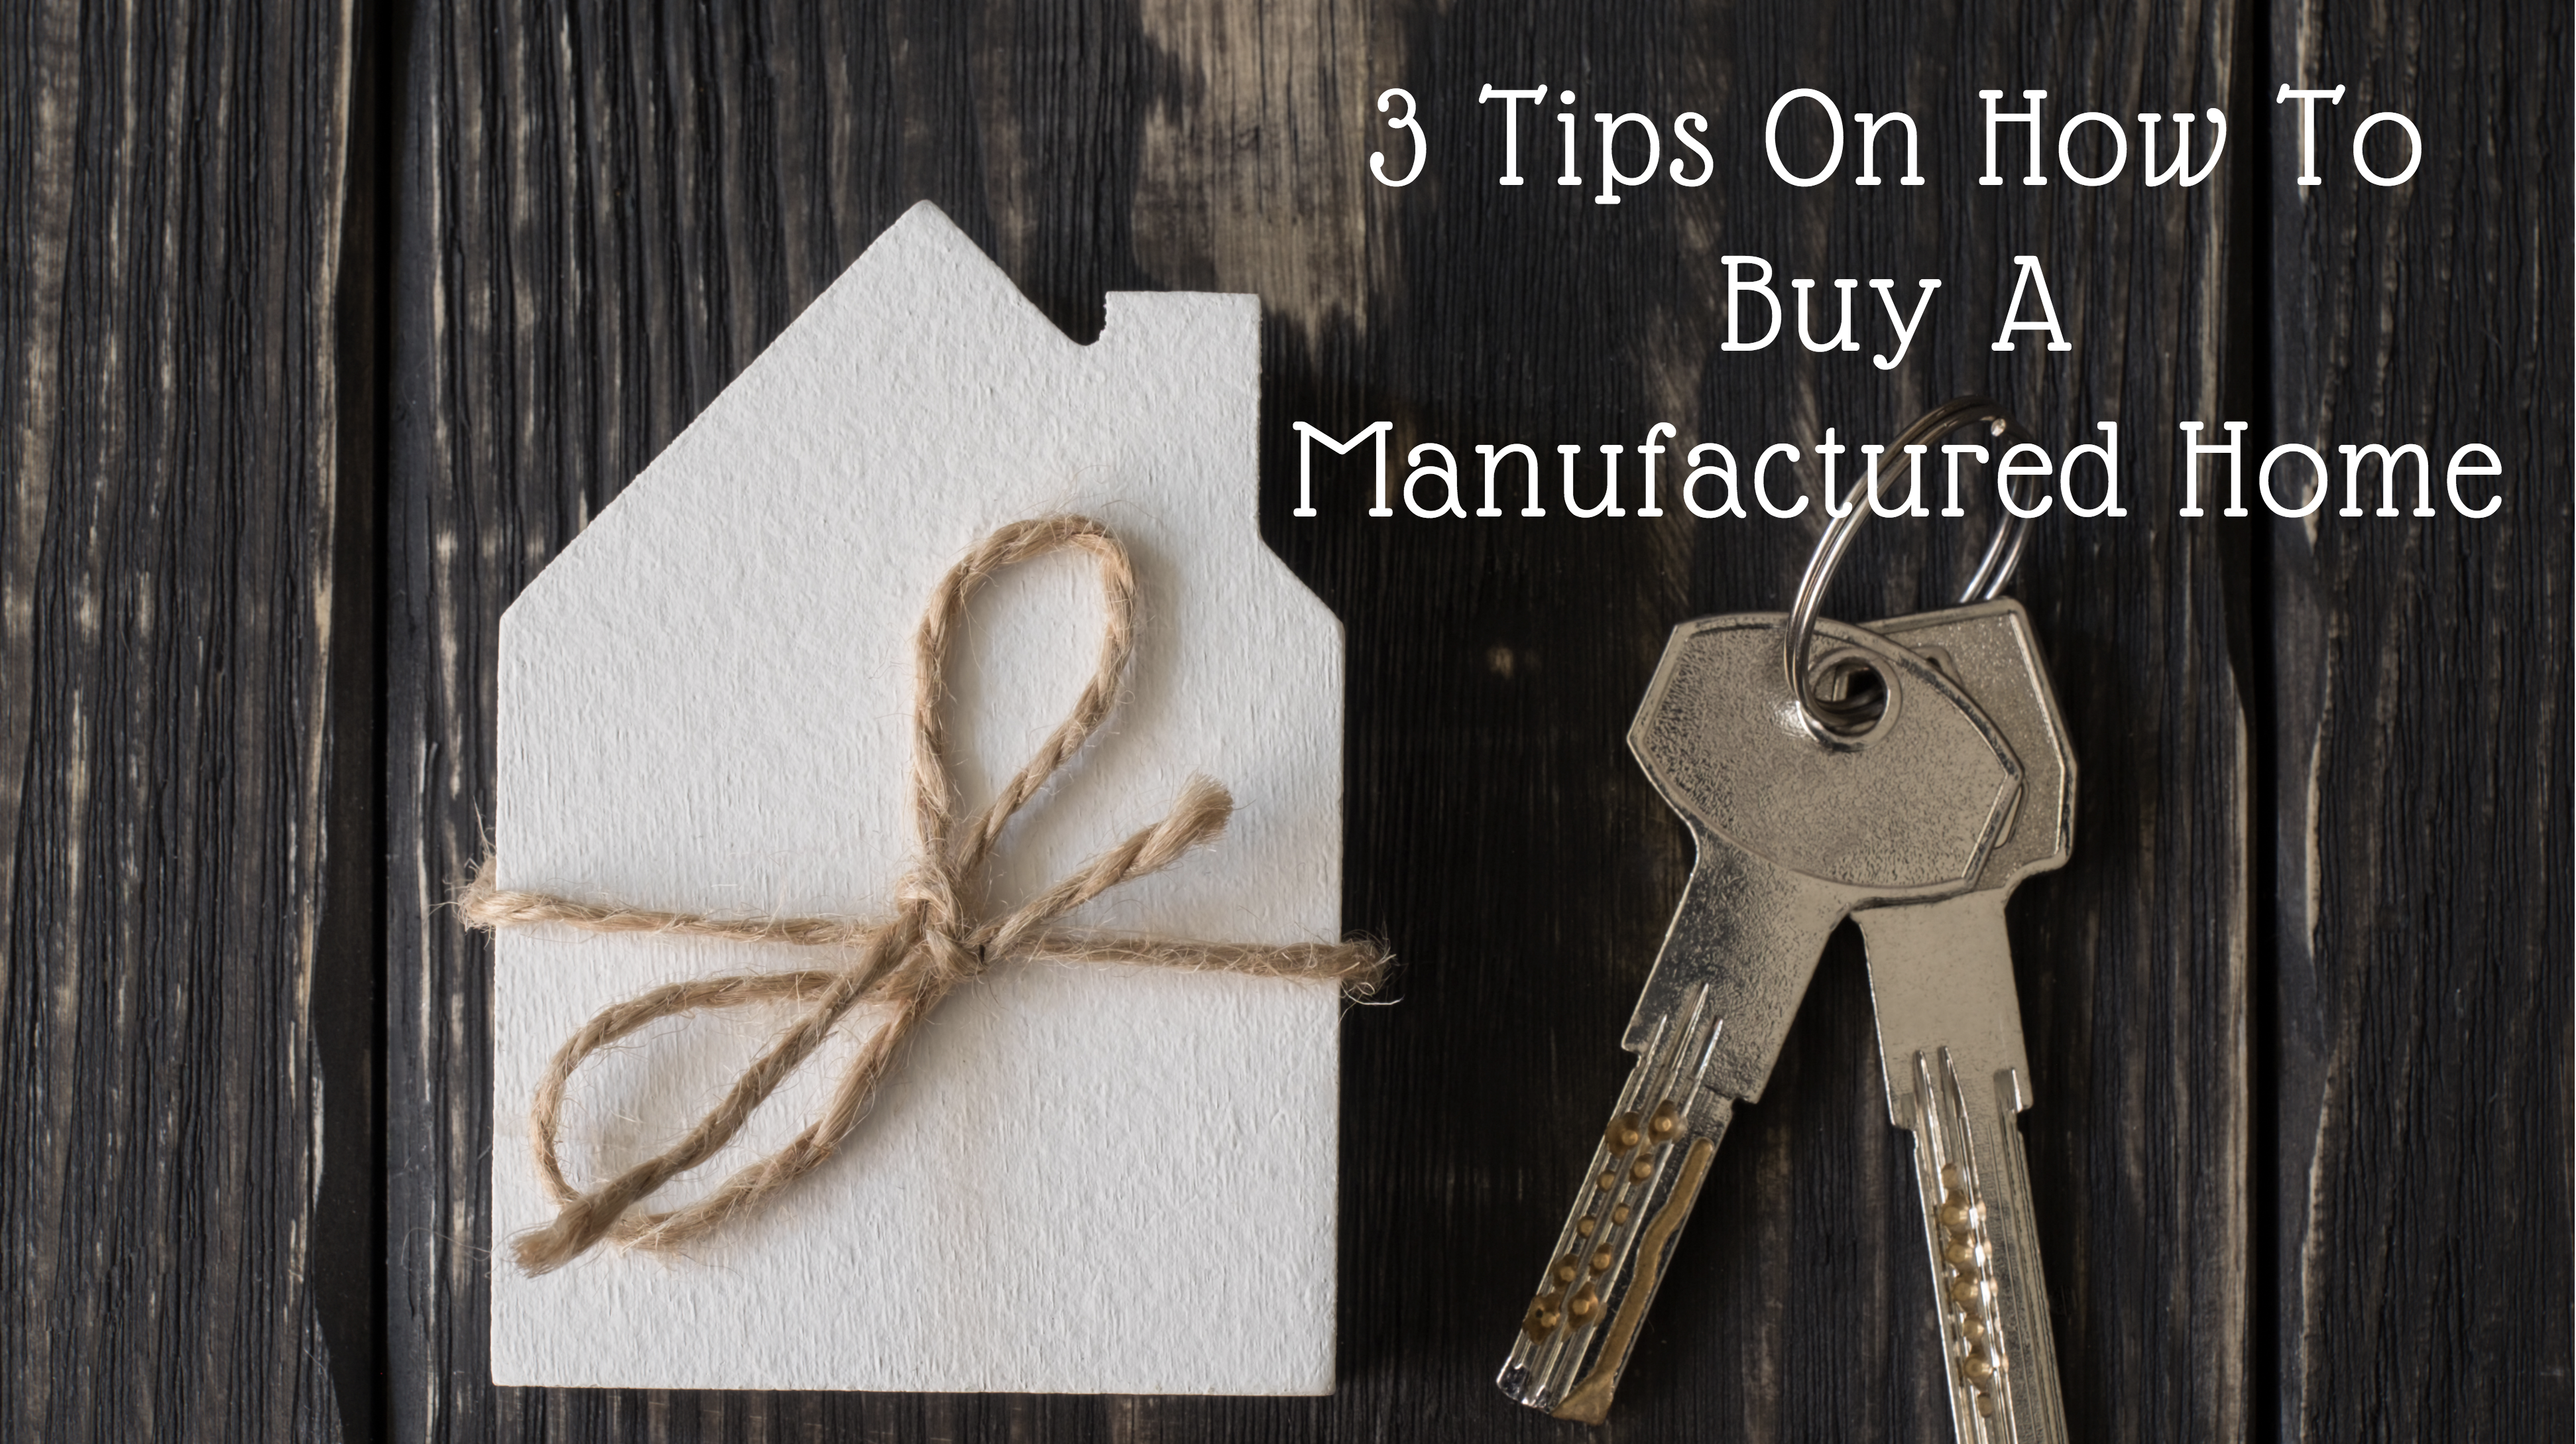 3 Tips On How To Buy A Manufactured Home